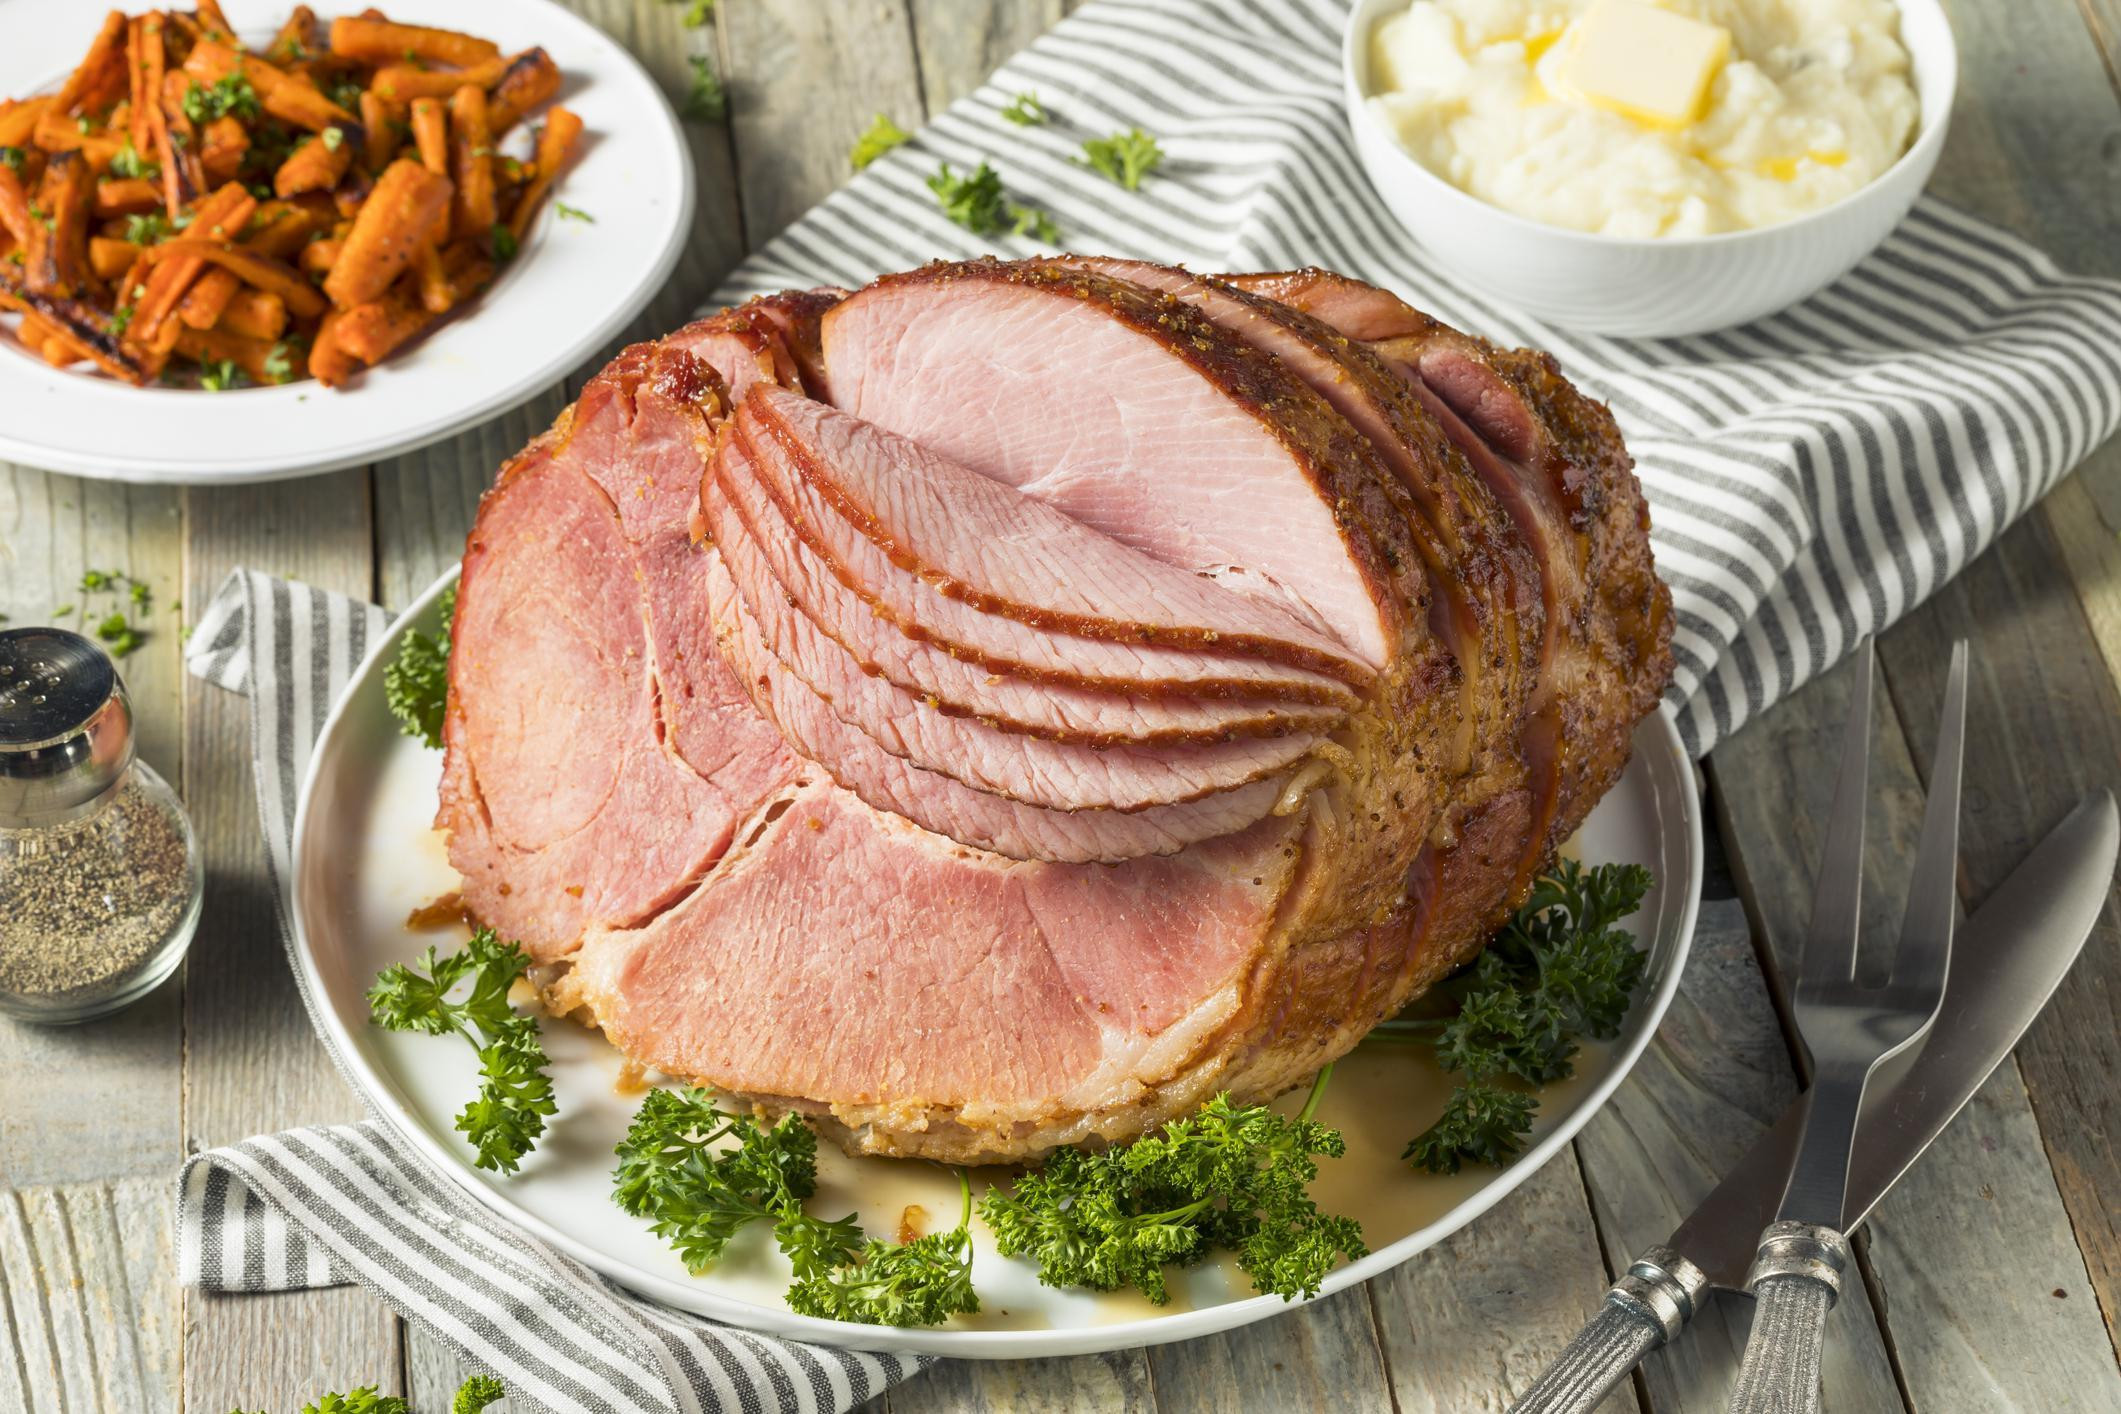 Recipes For Easter Ham
 17 Recipes for the Best Easter Ham Ever